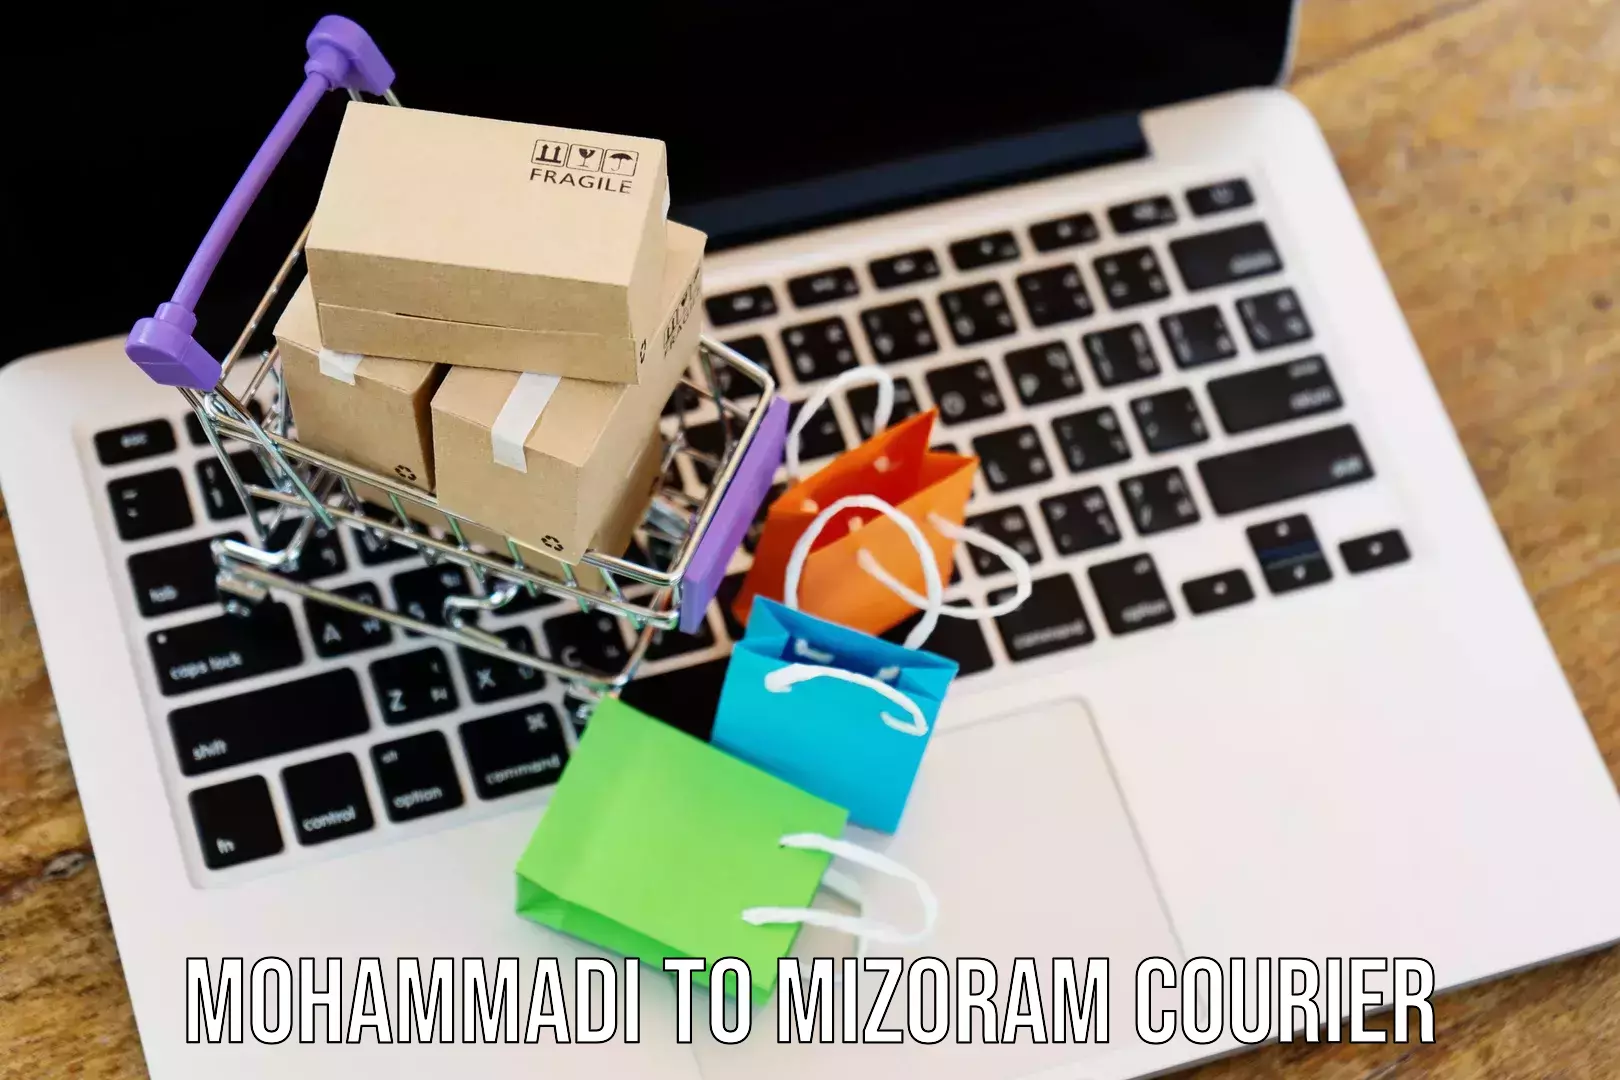 Air courier services Mohammadi to Mizoram